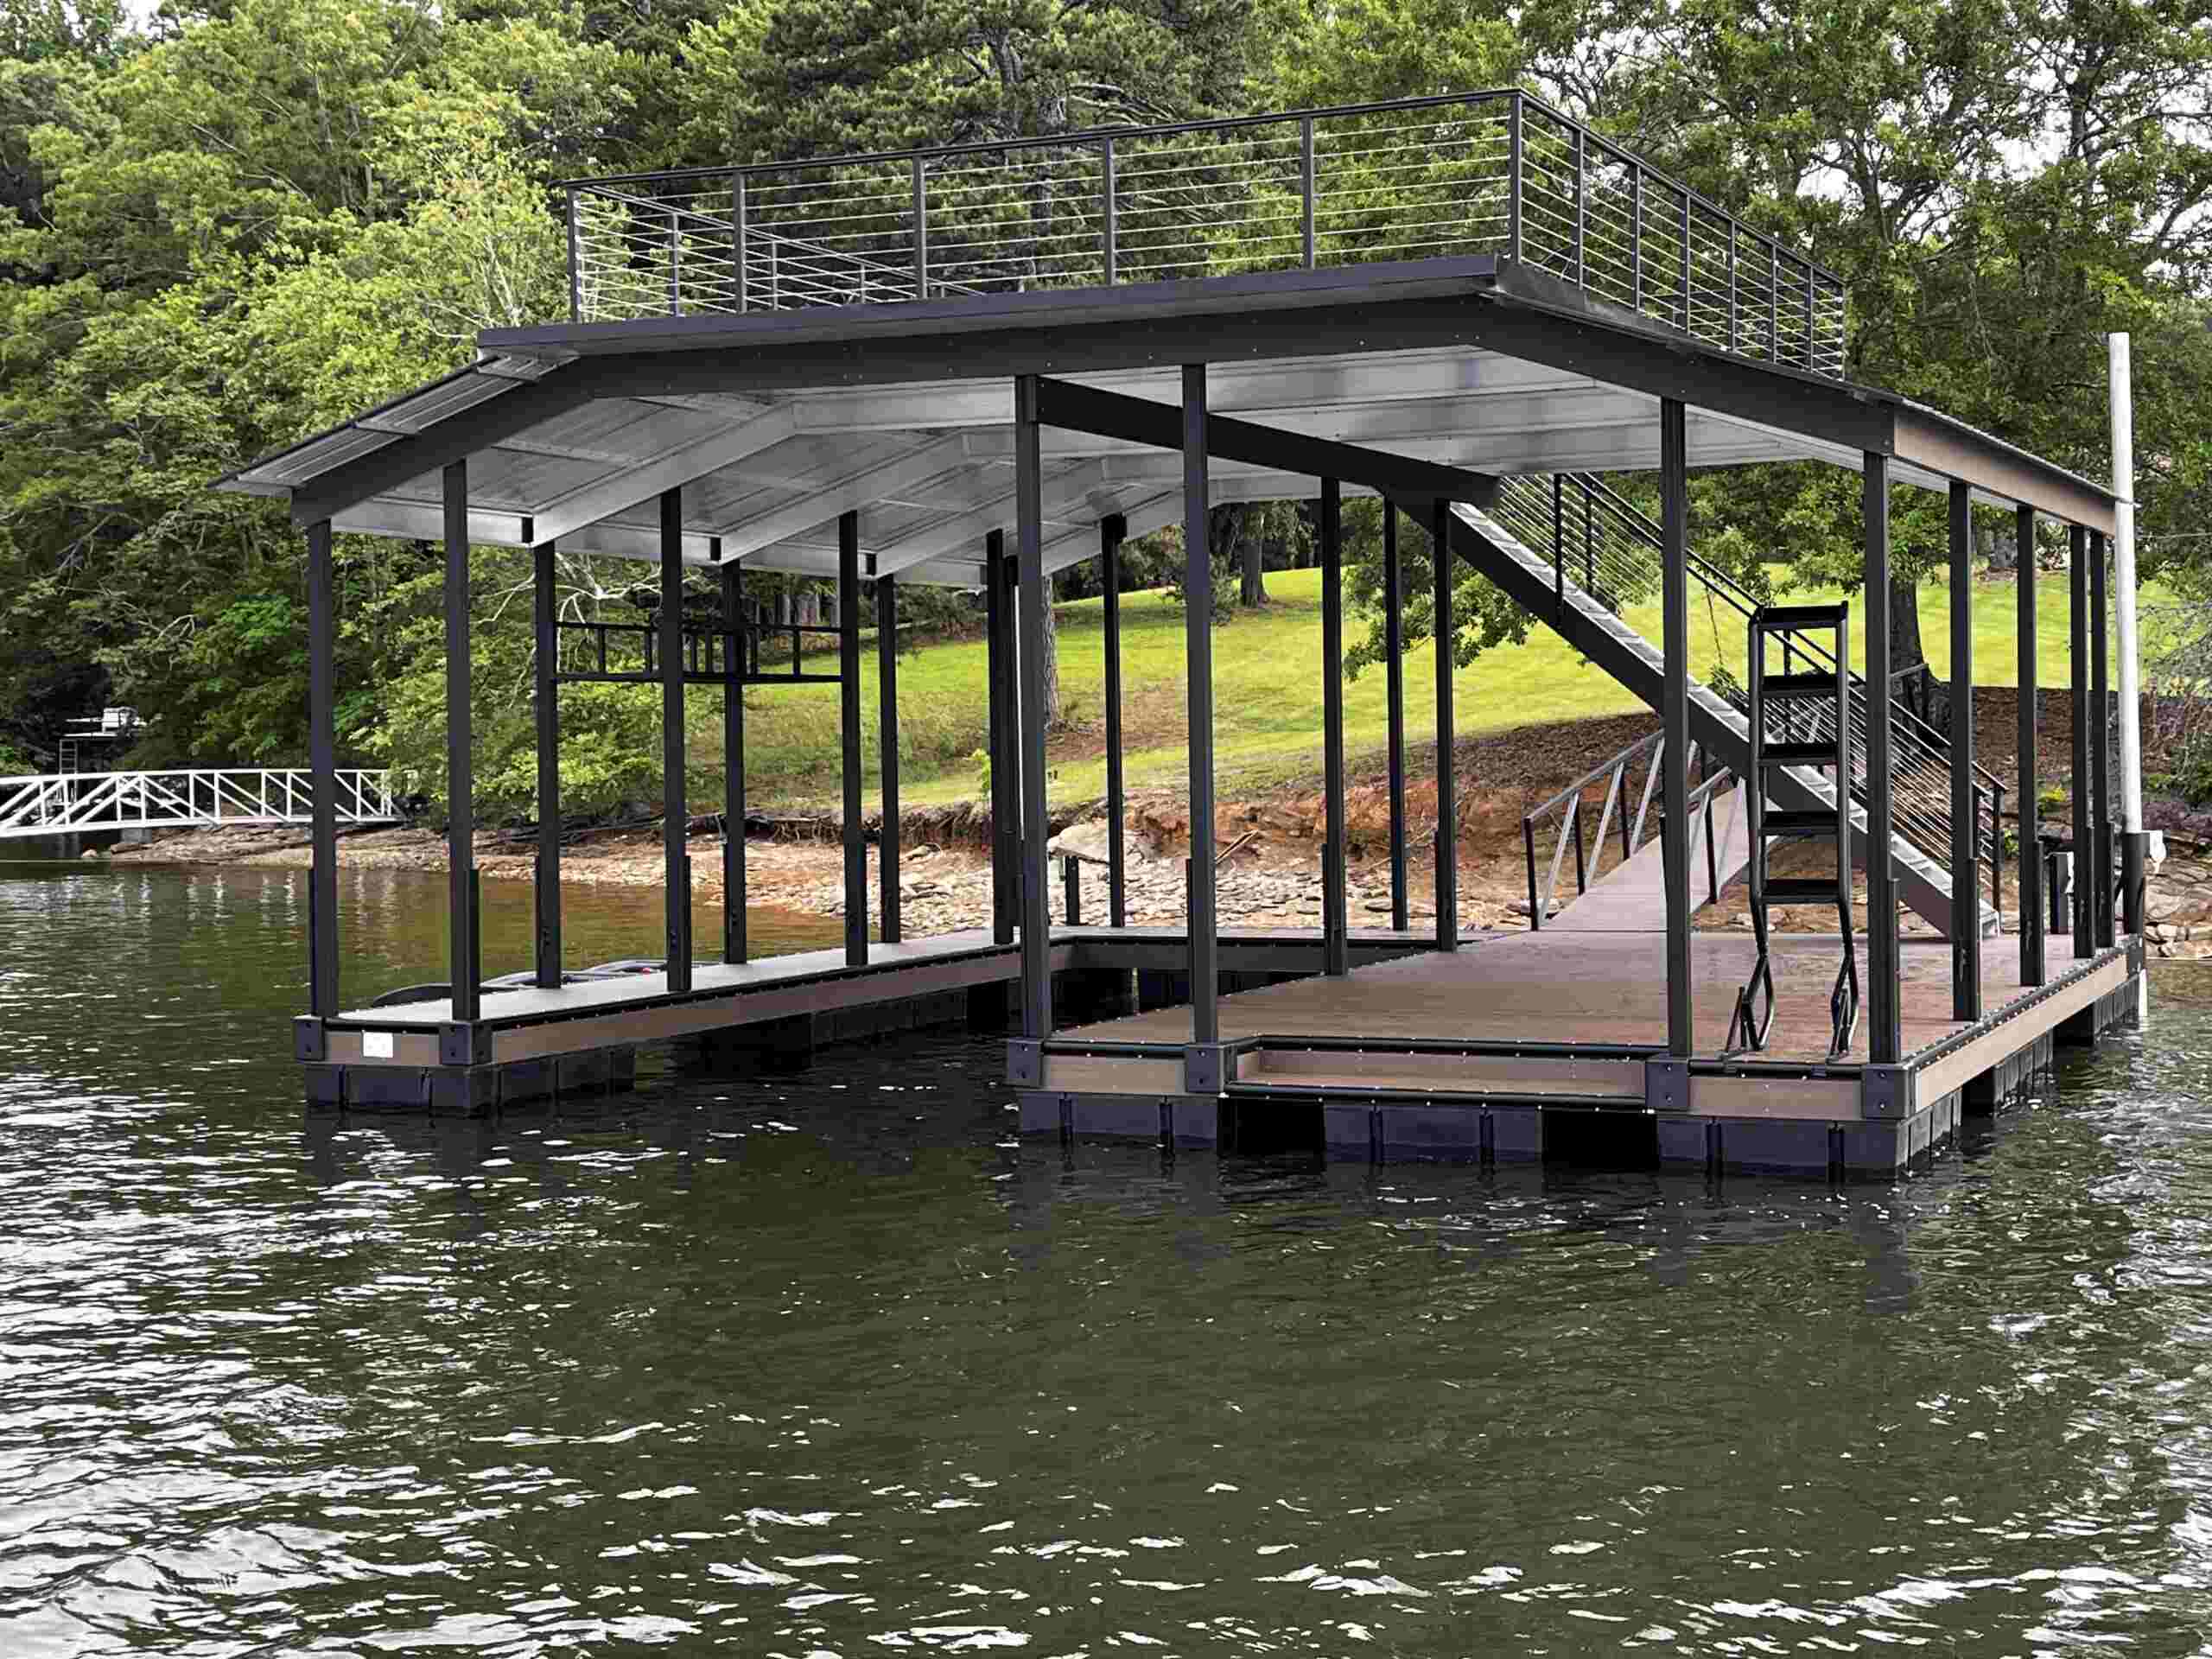 A luxury dock with a single boat berth and a serene seating area overlooking a lush, grassy lawn